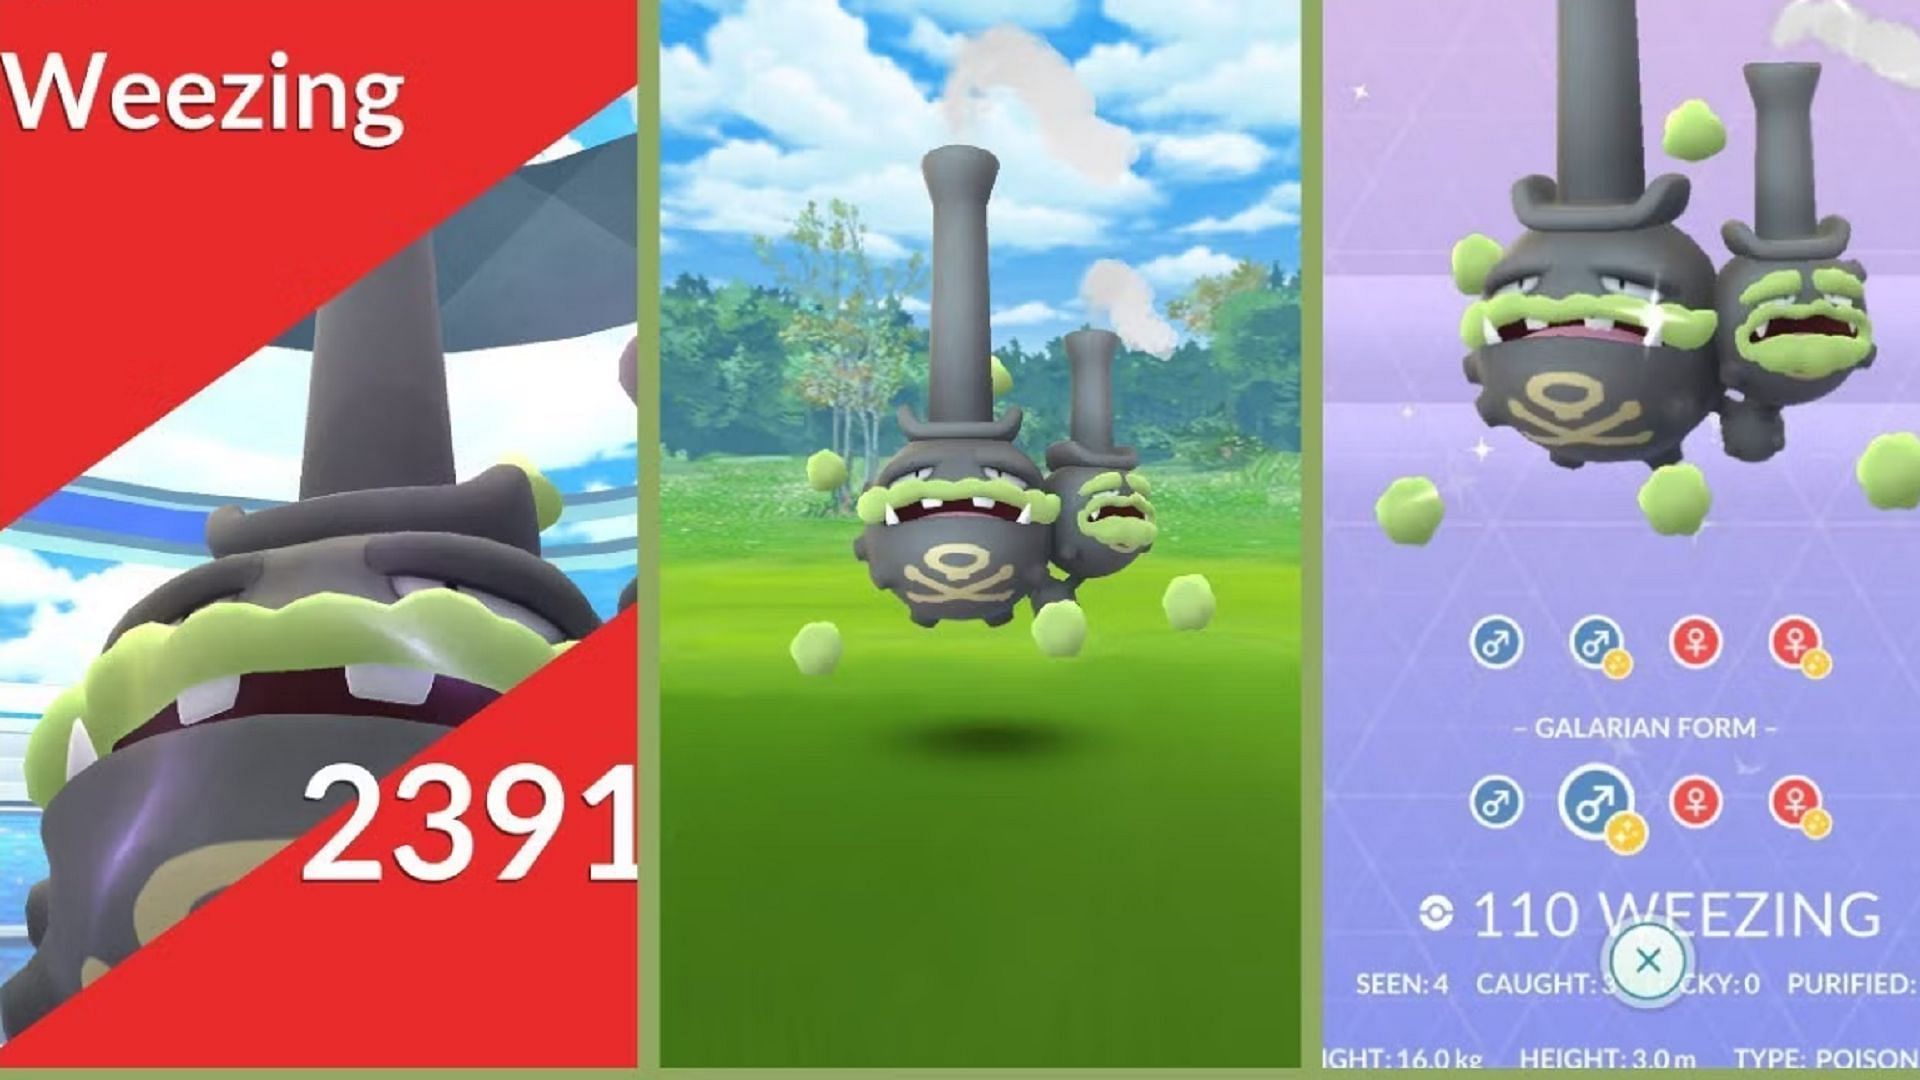 Galarian Weezing is a raid boss during Pokemon GO